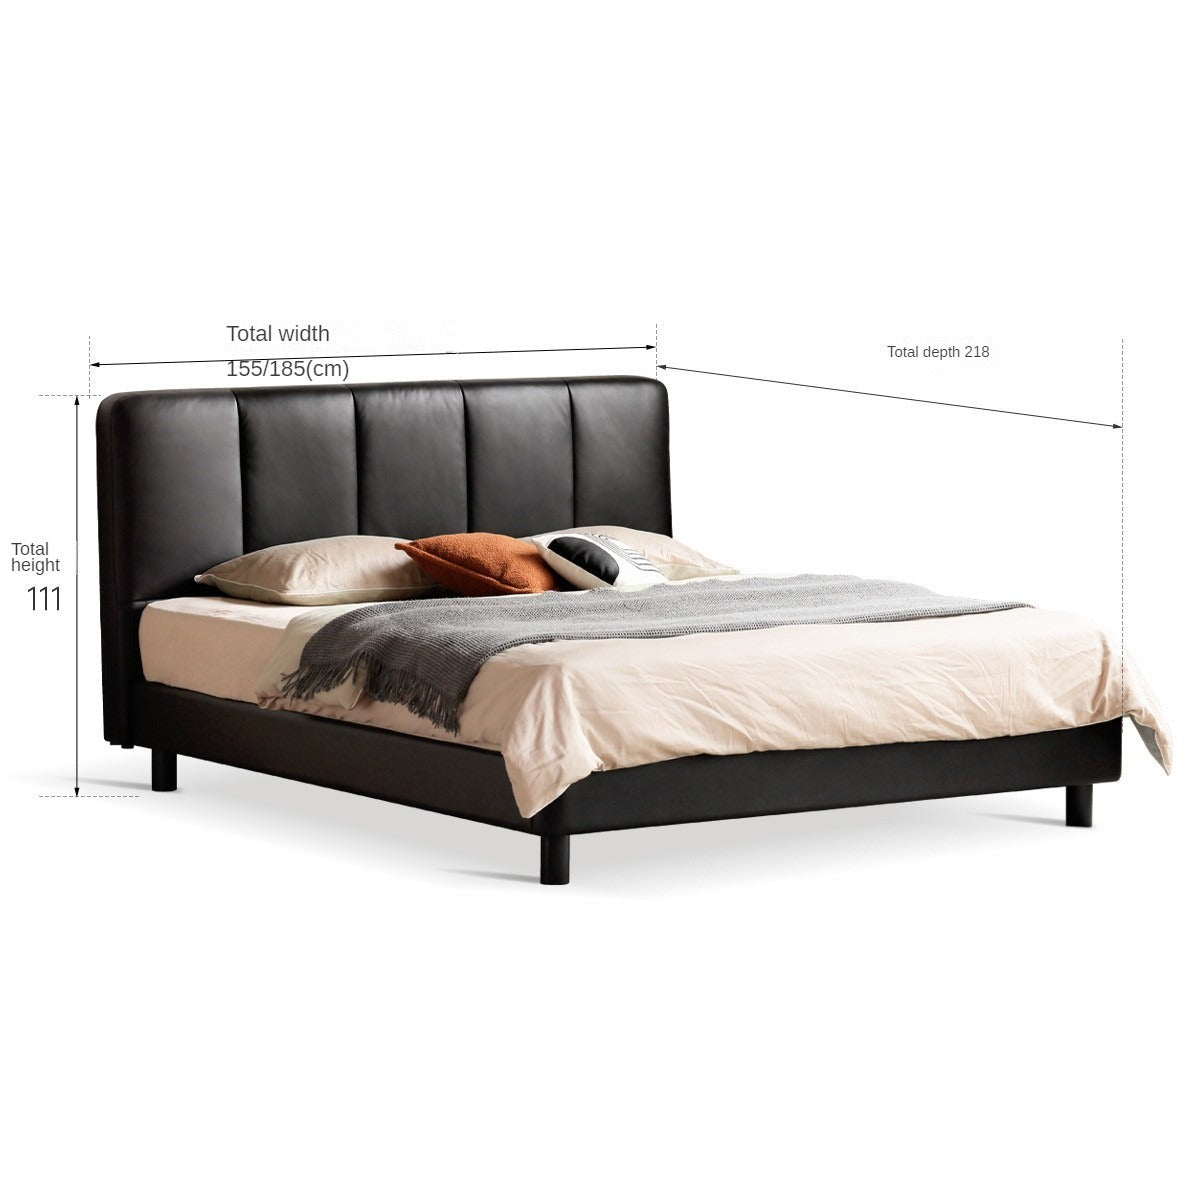 Genuine leather soft Light Luxurious Modern Upholstered Bed , Head Layer Cowhide Black Edged Bed"